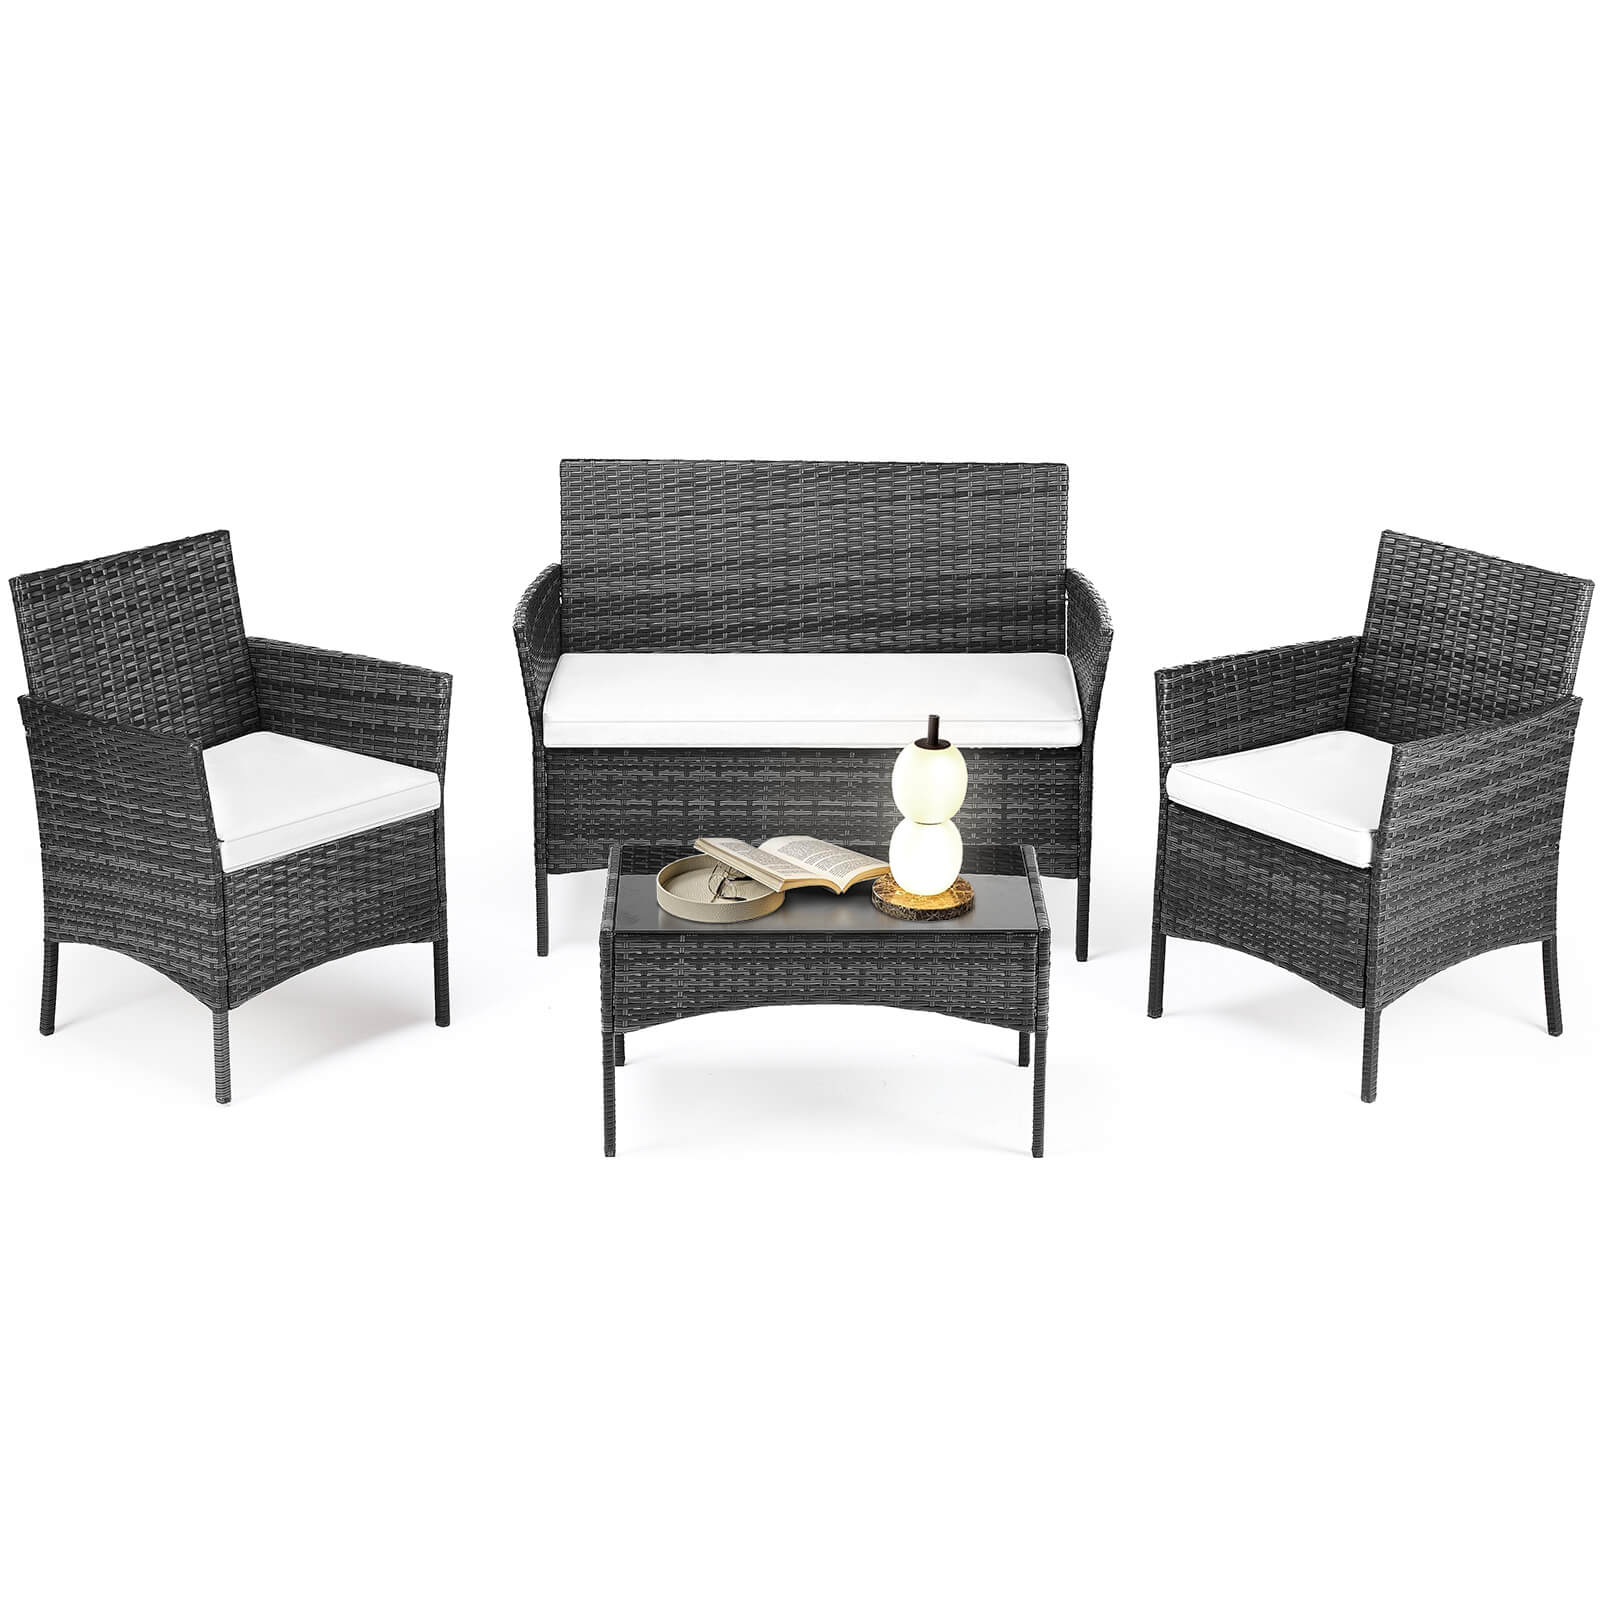 3 Piece Patio Wicker Furniture Set , Patio Chair w/ Table w/ Cushions, Simple Modern Comfort